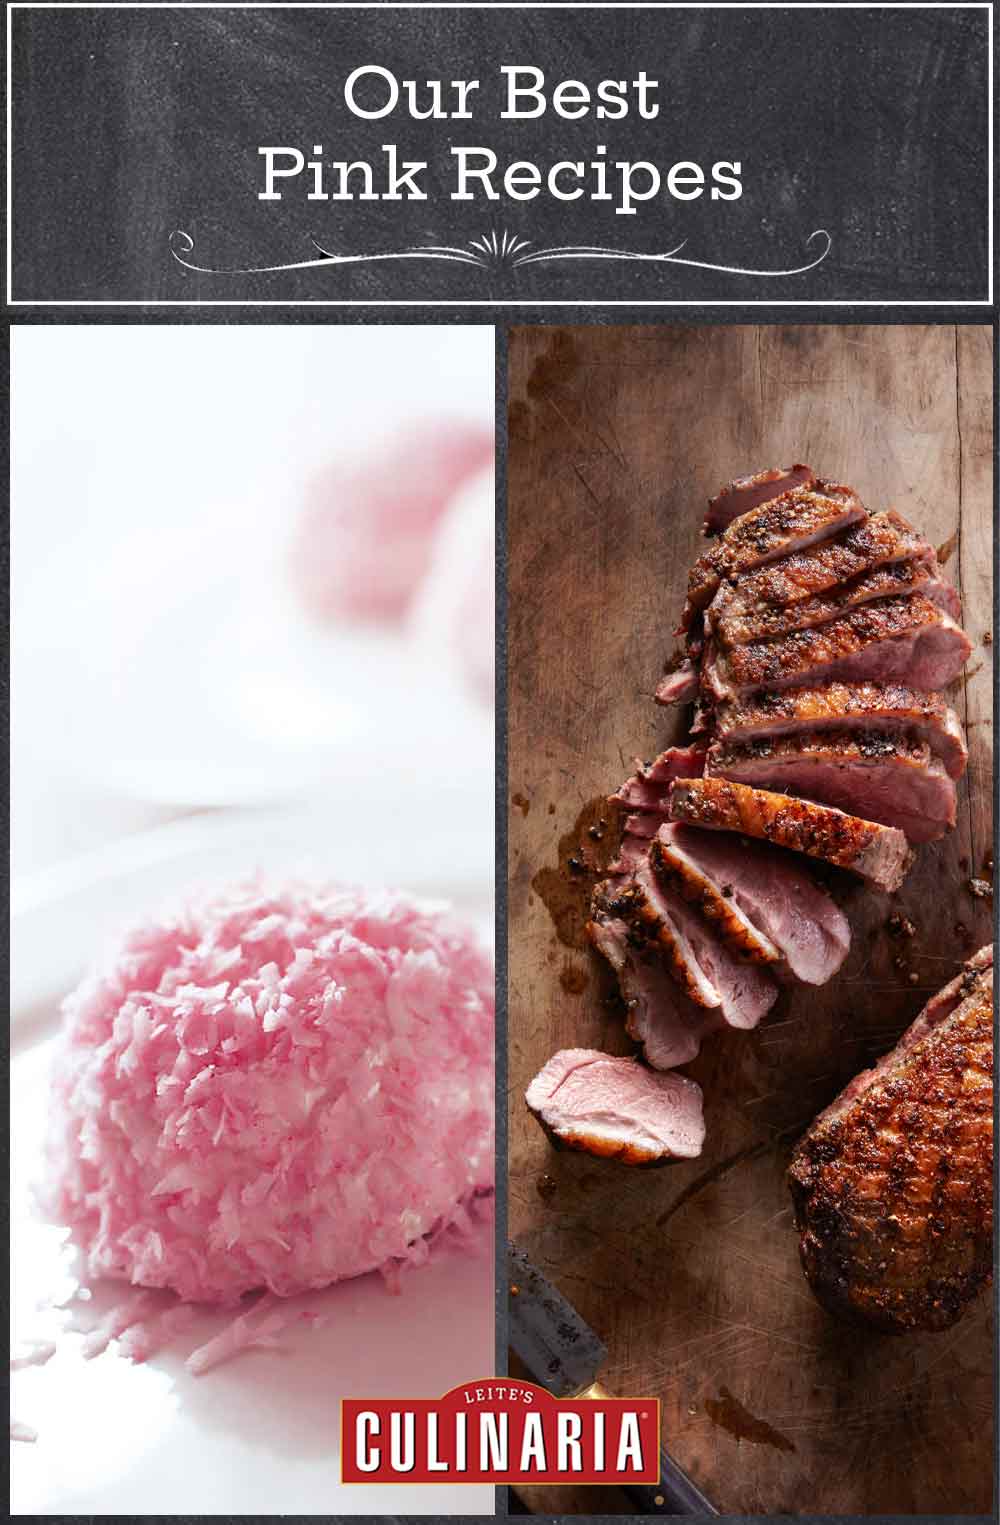 Images of two of the pink food and drink for your Valentine's dinner -- sno balls, and seared duck breast.